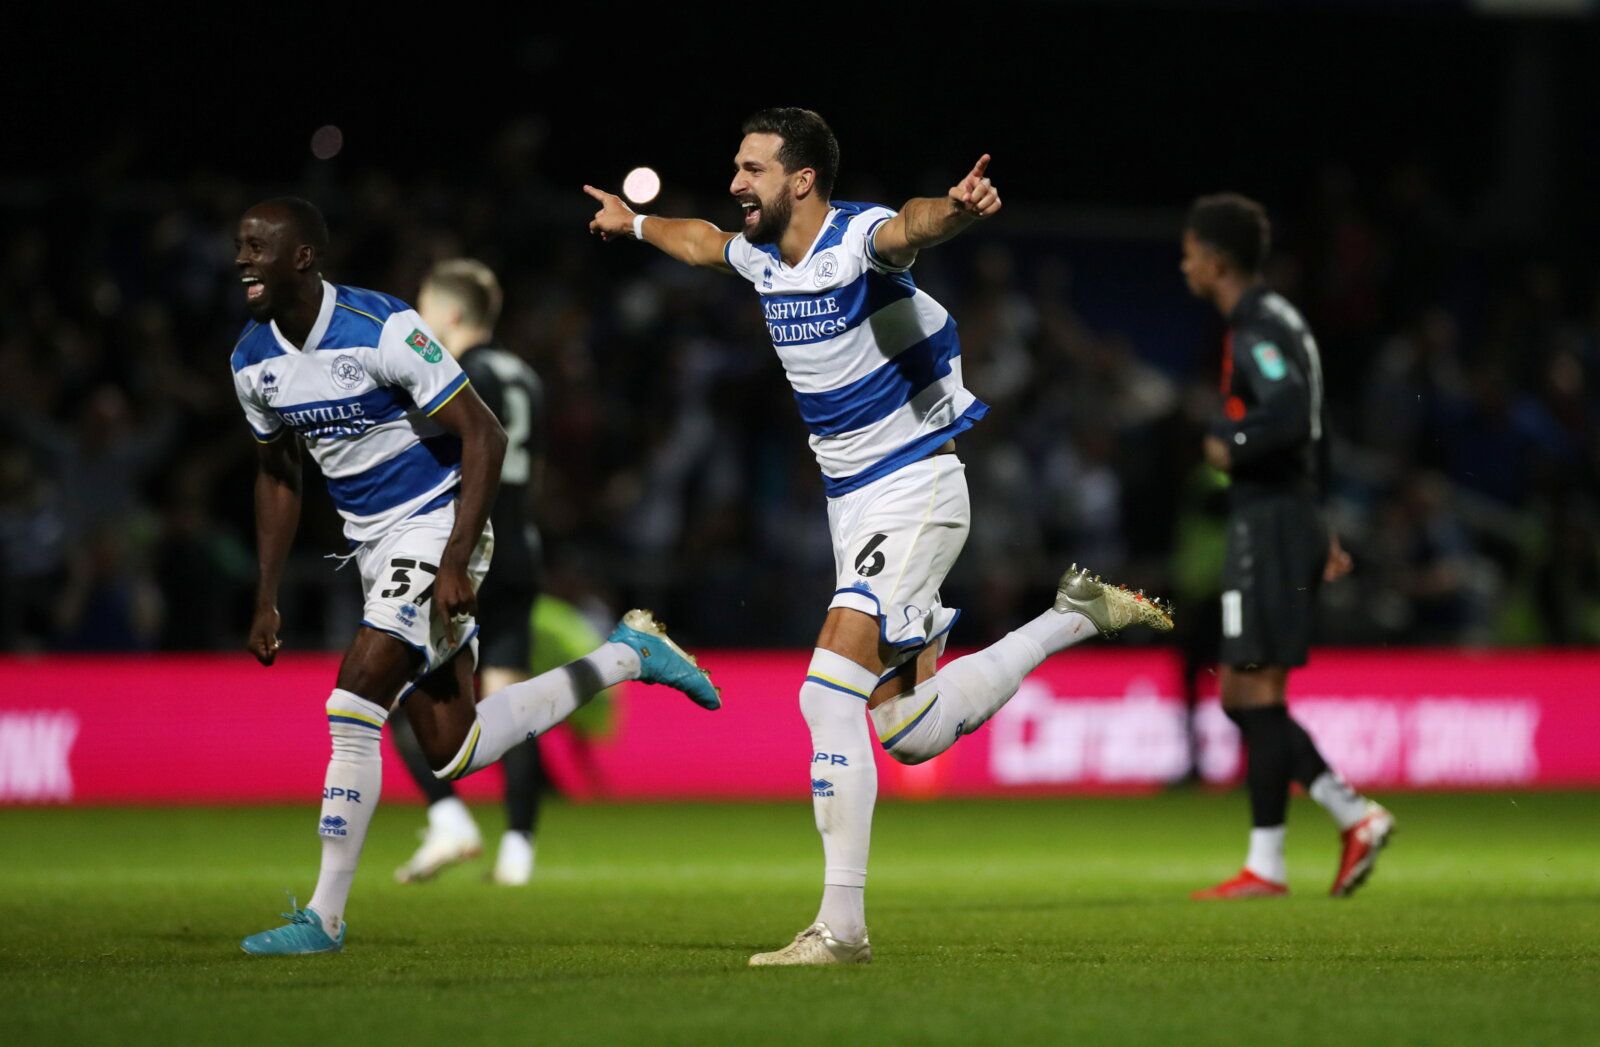 Soccer Football - Carabao Cup - Third Round - Queens Park Rangers v Everton - Loftus Road, London, Britain - September 21, 2021   Queens Park Rangers' Yoann Barbet and Albert Adomah celebrate after winning the penalty shoot-out  Action Images via Reuters/Peter Cziborra   EDITORIAL USE ONLY. No use with unauthorized audio, video, data, fixture lists, club/league logos or 'live' services. Online in-match use limited to 75 images, no video emulation. No use in betting, games or single club /league/